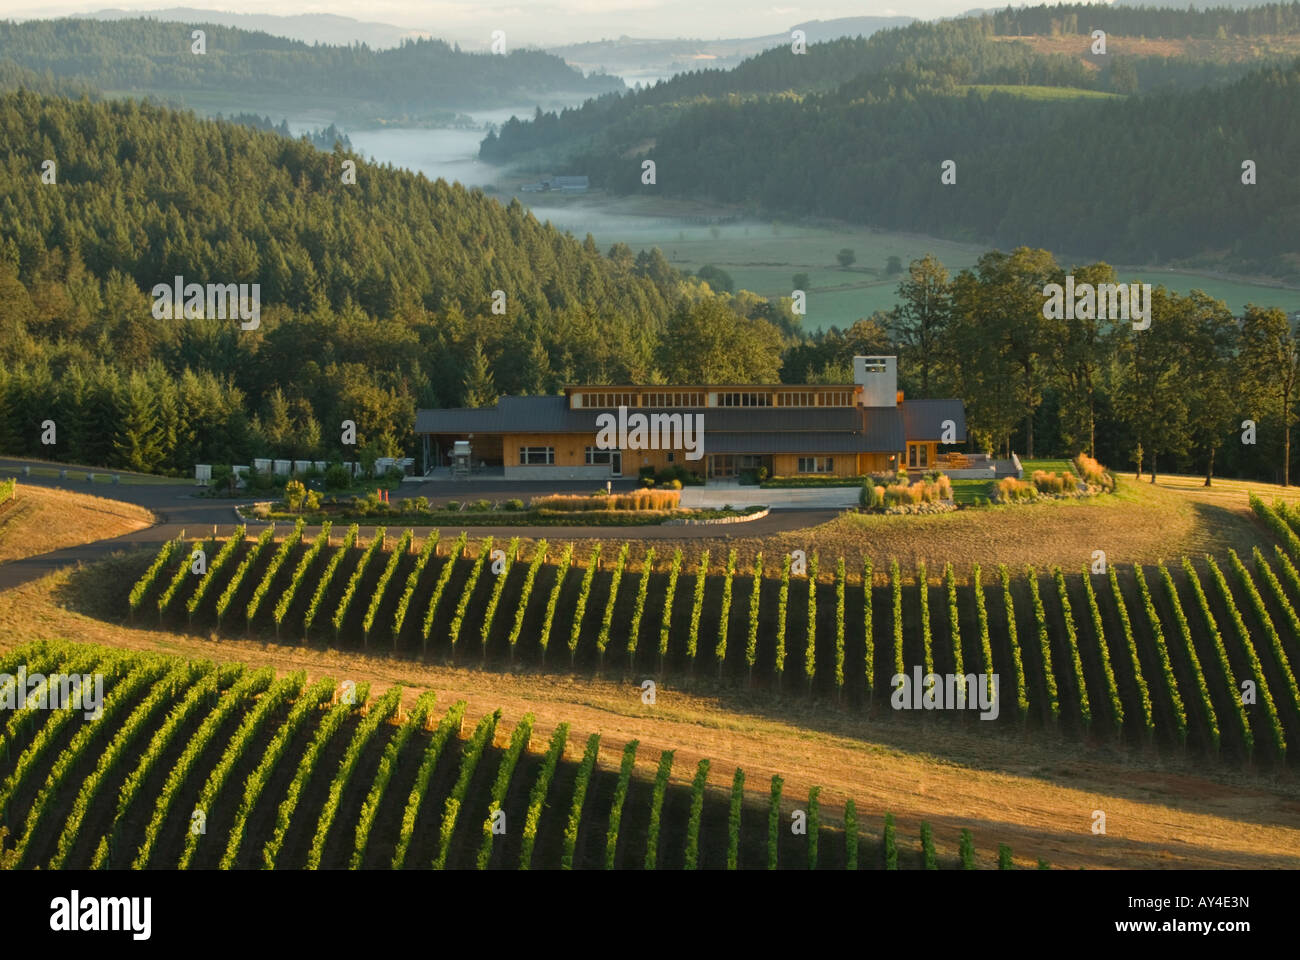 Aerial view of Penner Ash Winery and estate vineyards Yamhill AVA Willamette Valley Oregon Stock Photo